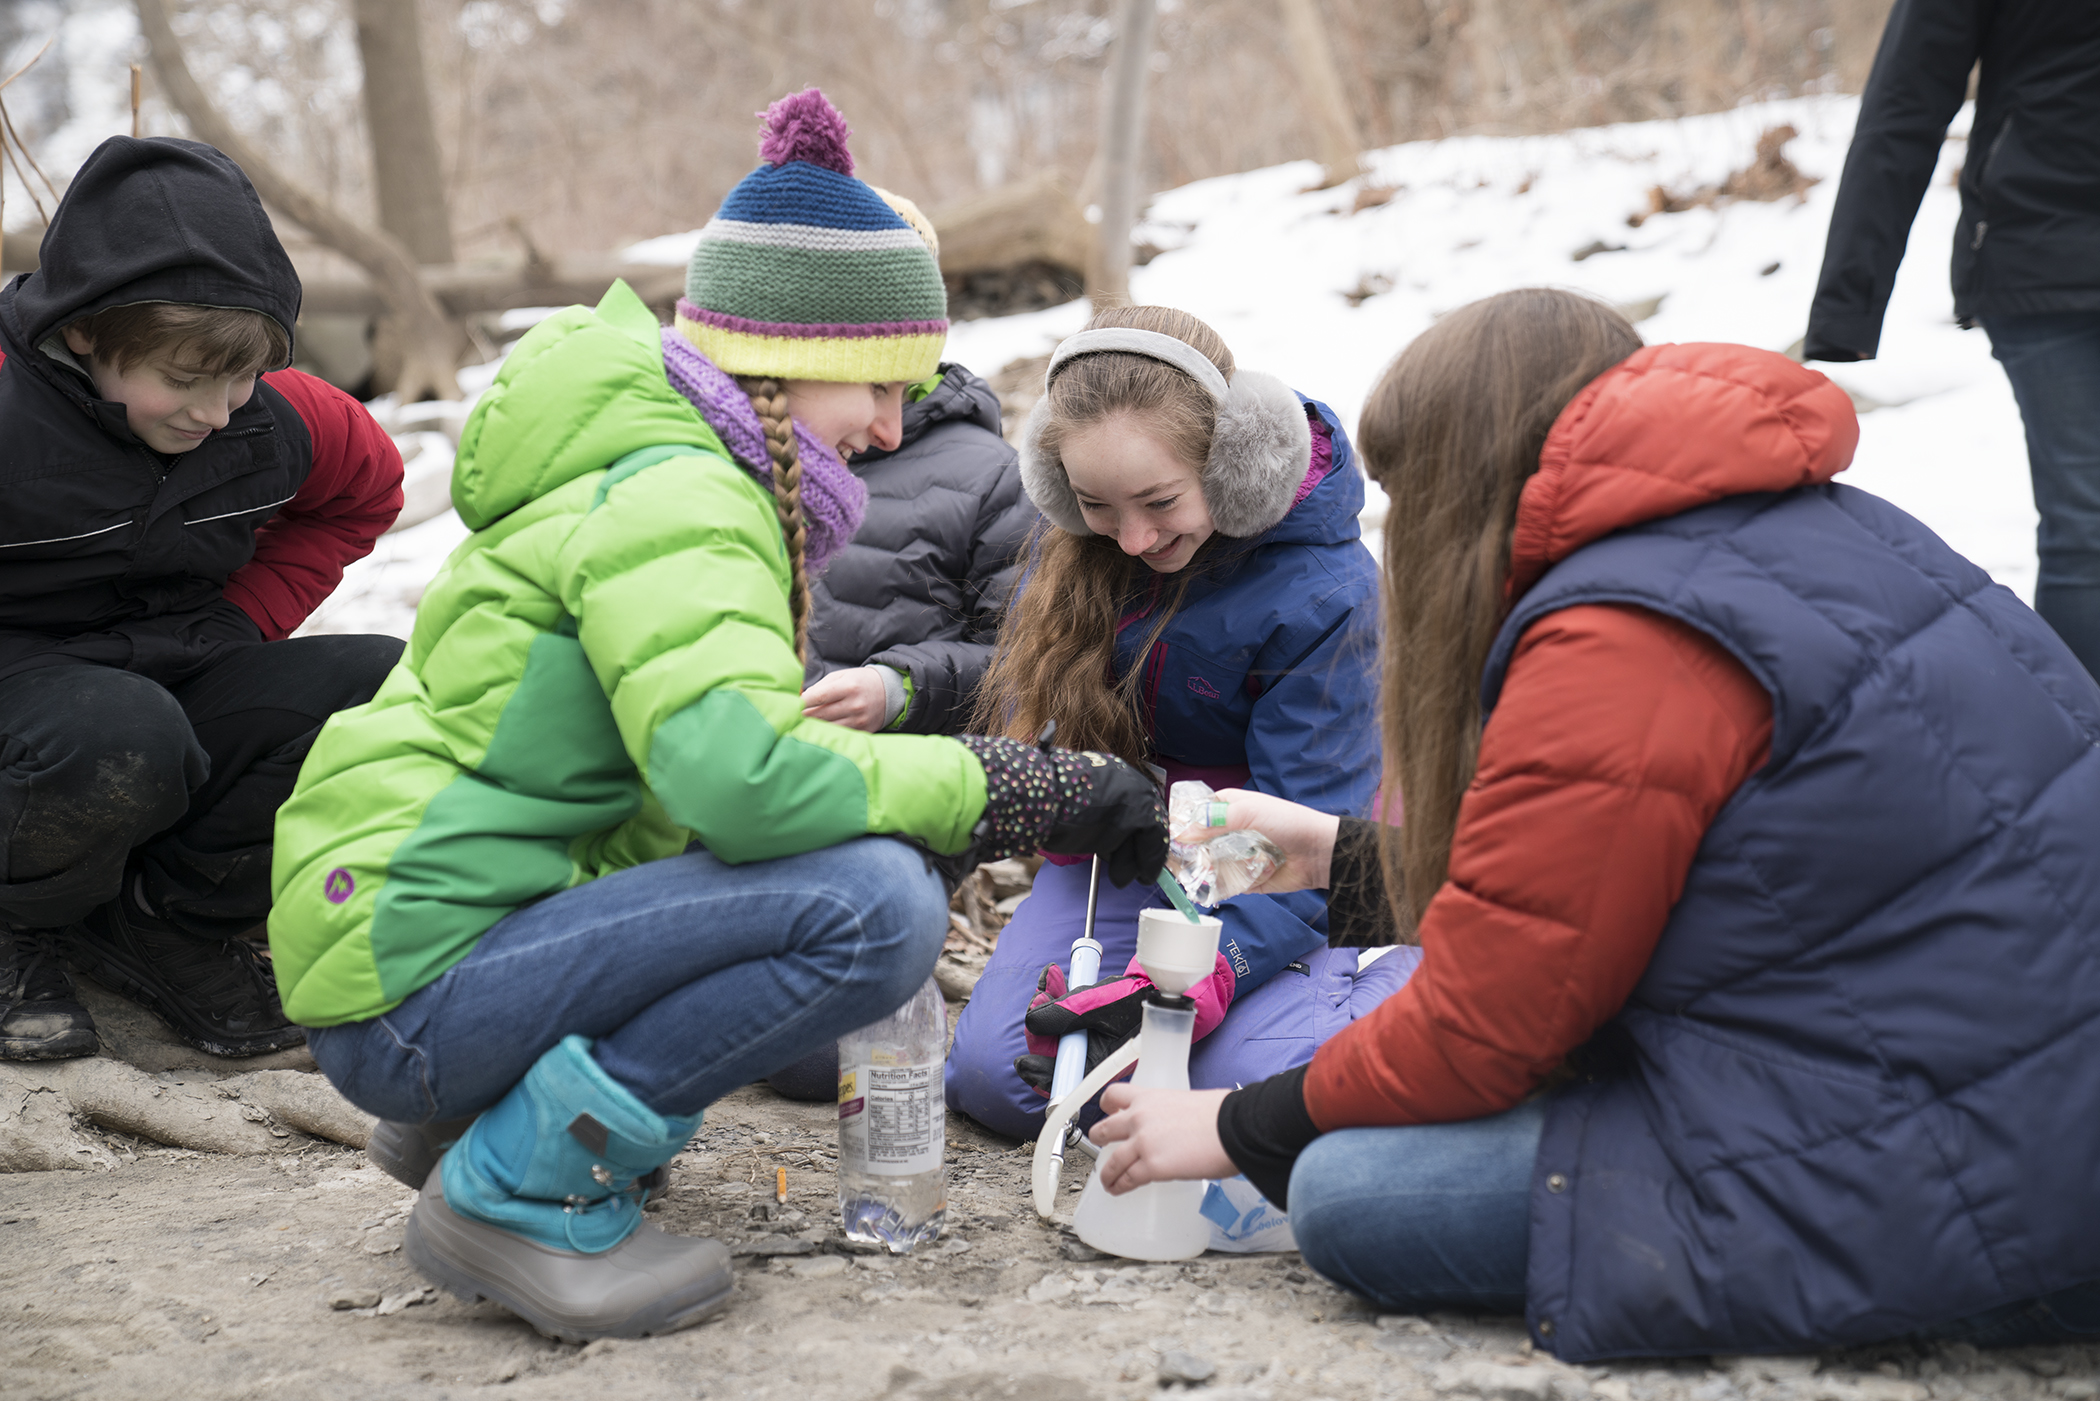 Students crouching on ground in the winter pouring water into a container